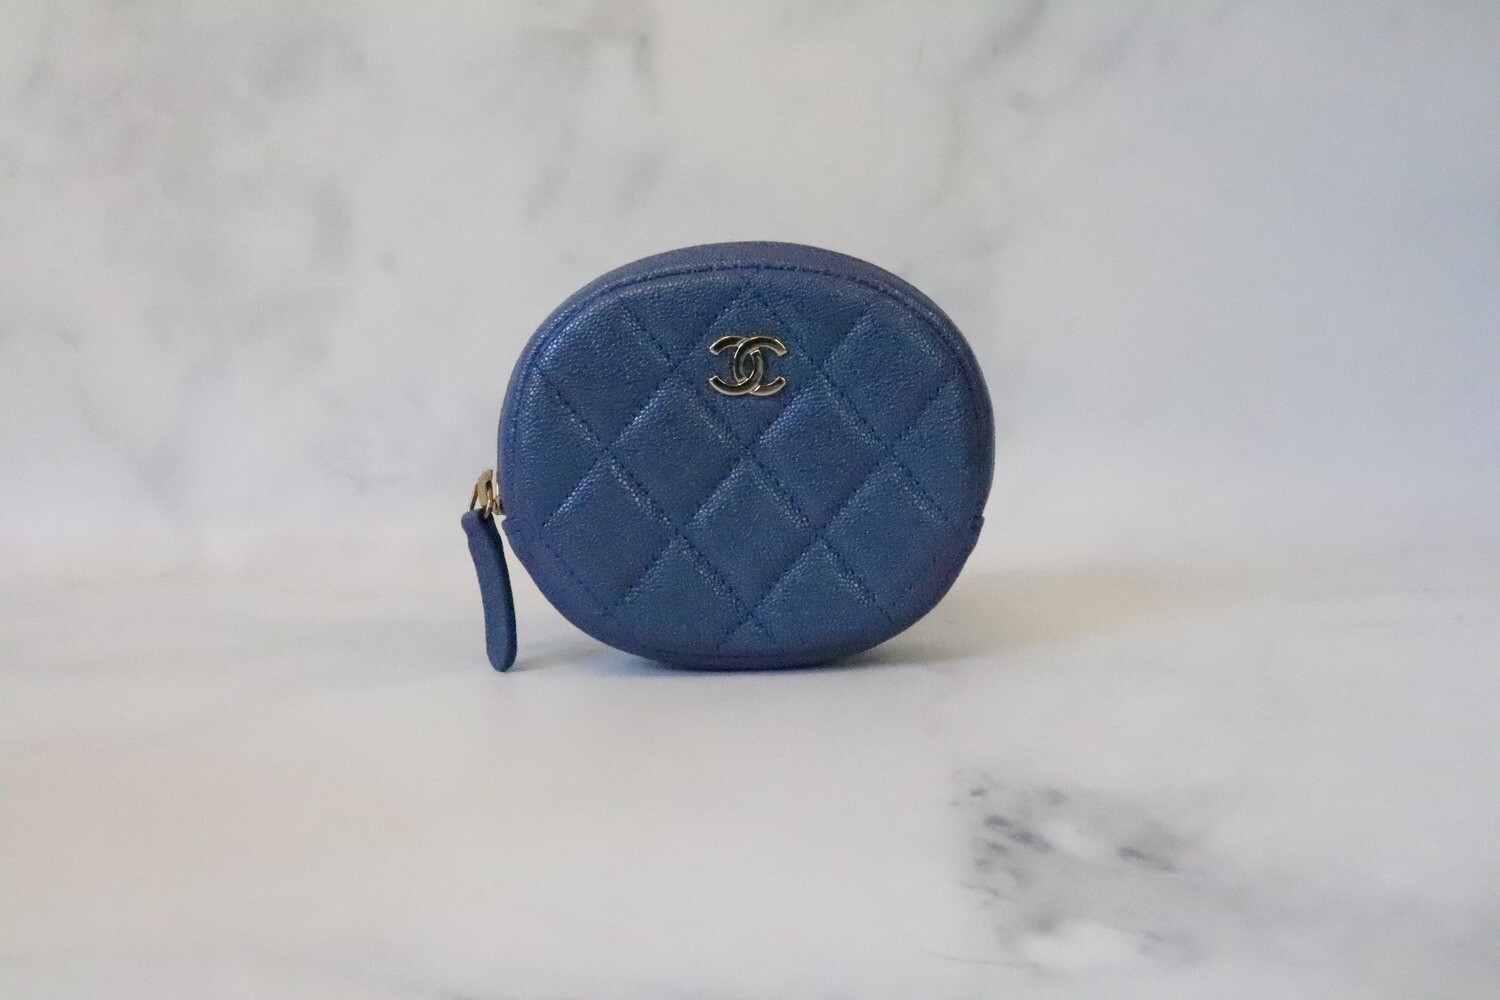 Chanel SLG Round 19S Blue Iridescent Coin Purse, Like New in Box